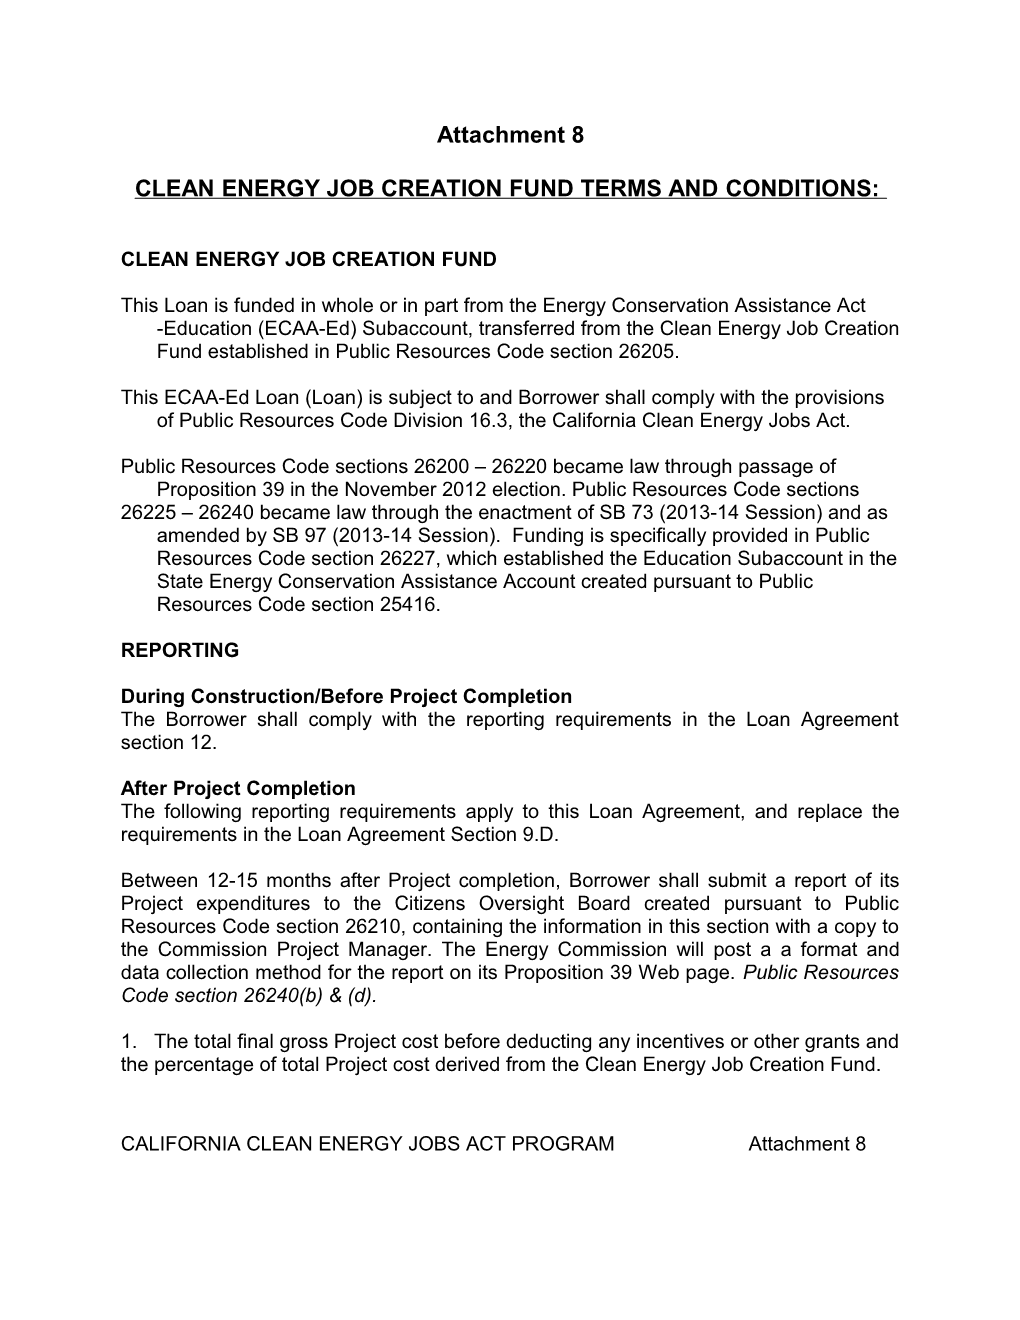 Clean Energy Job Creation Fund Terms and Conditions